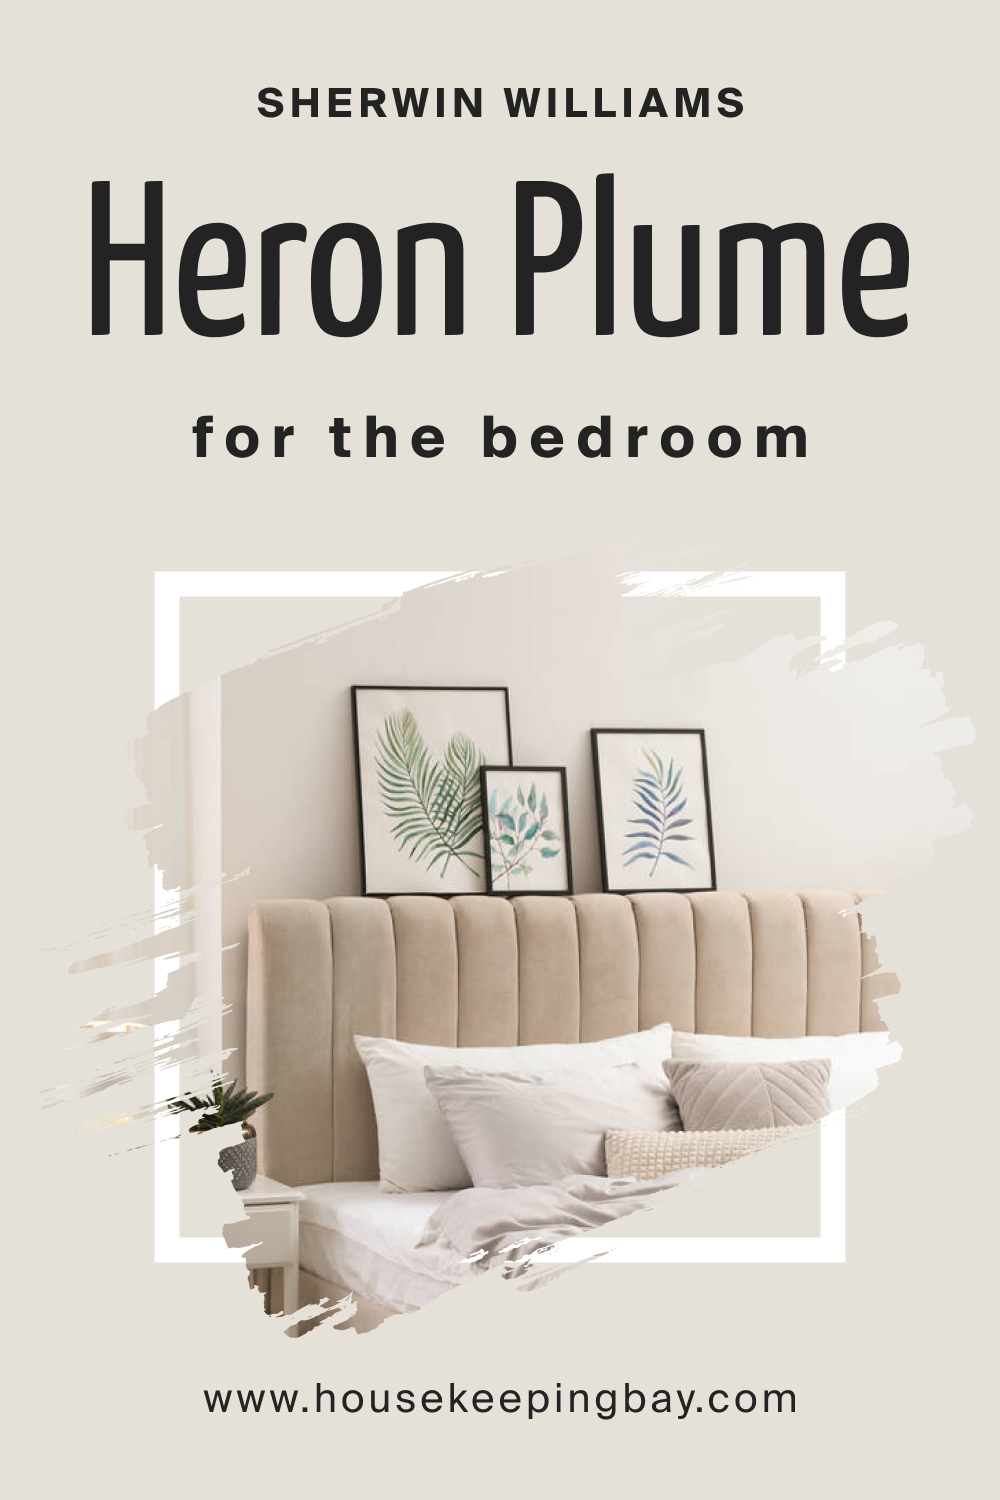 Sherwin Williams. SW Heron Plume For the bedroom